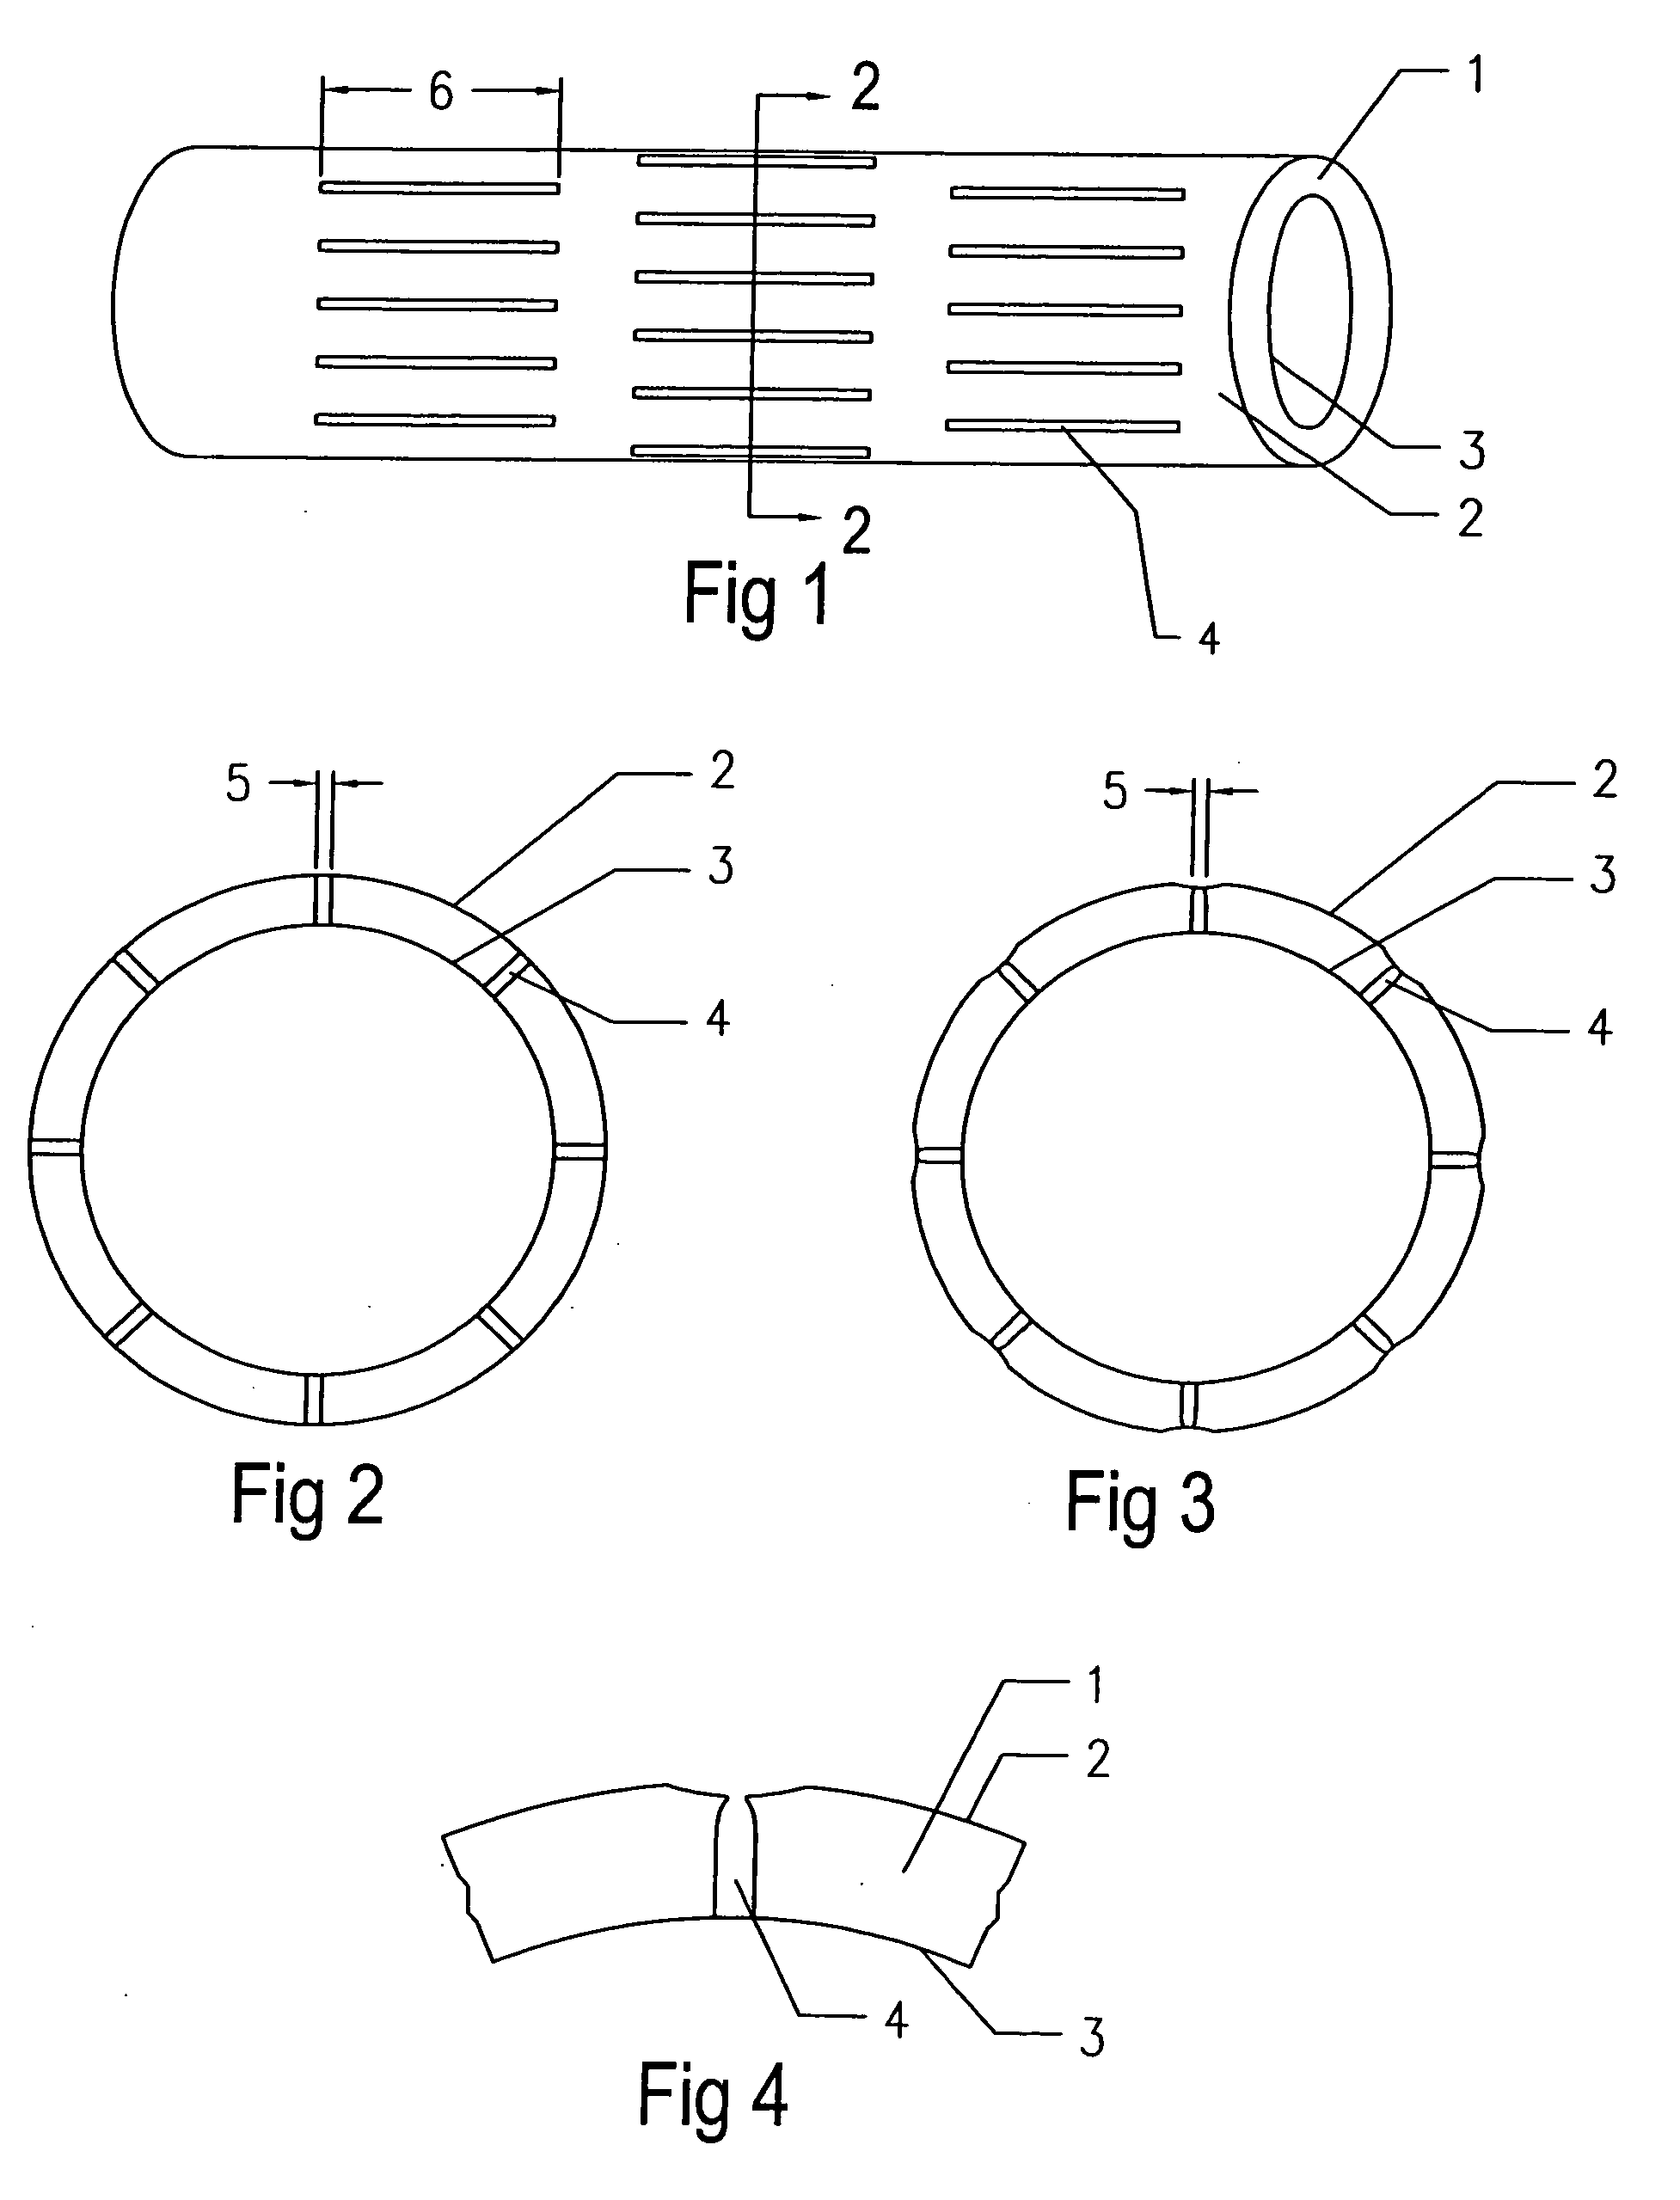 Method and apparatus to reduce the width of a slot or opening in a pipe, tube or other object